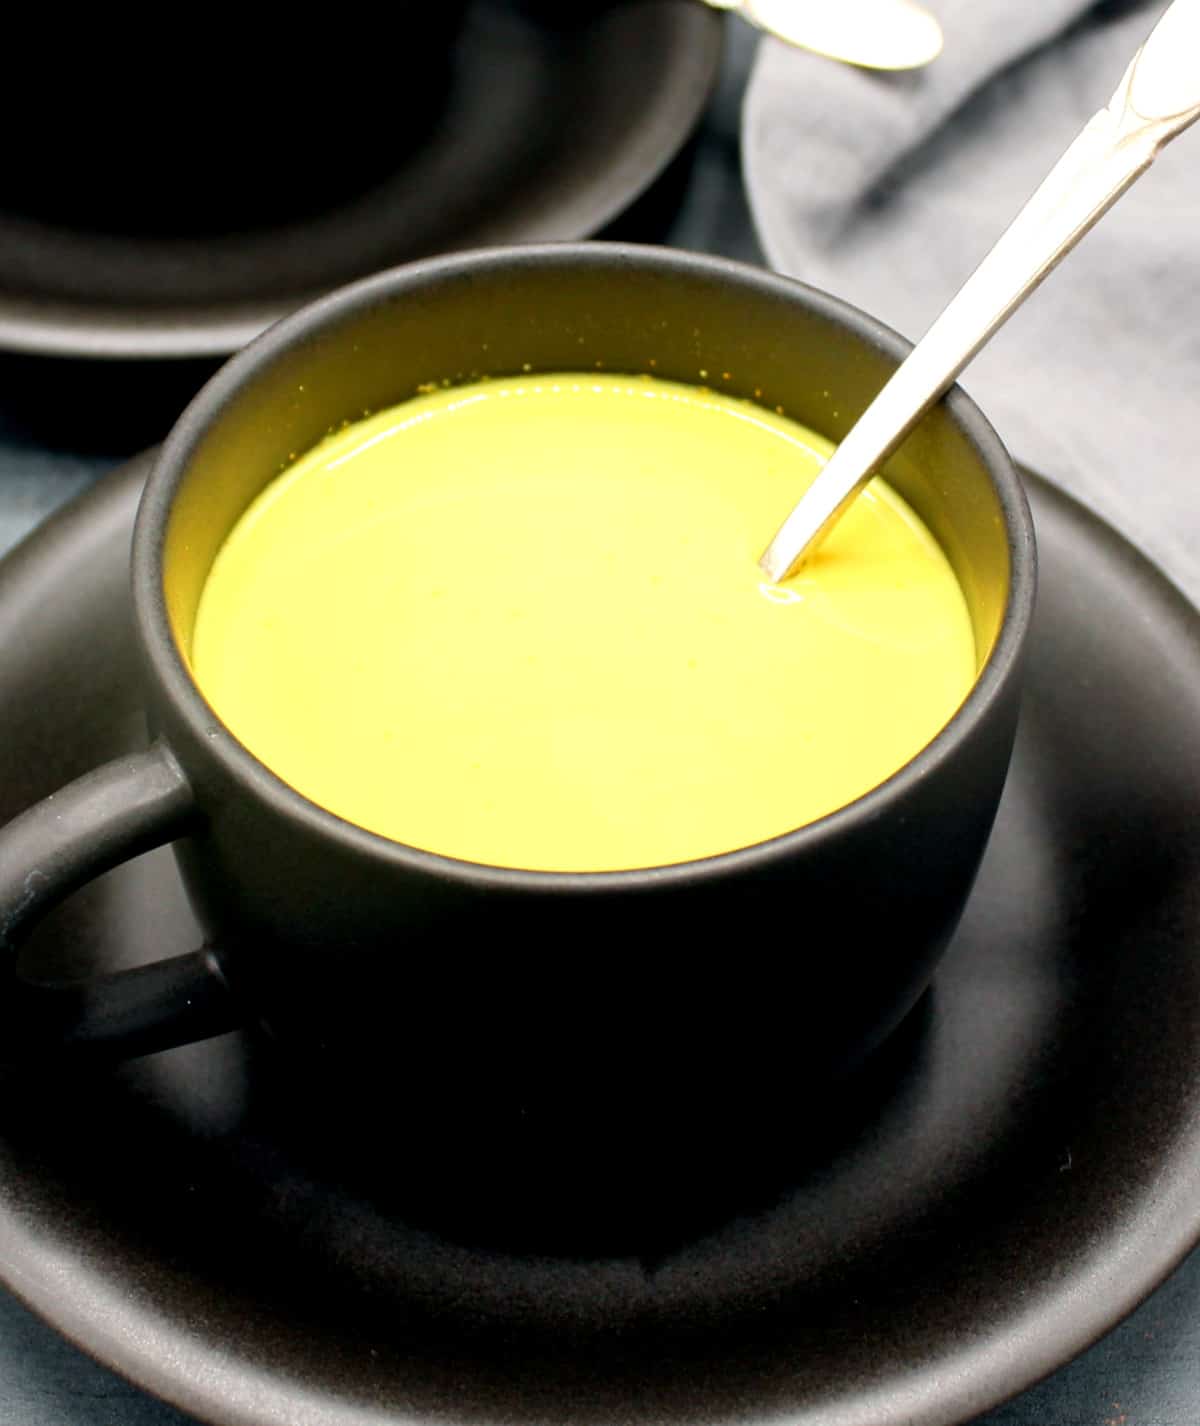 Turmeric milk in black cup with saucer and spoon.